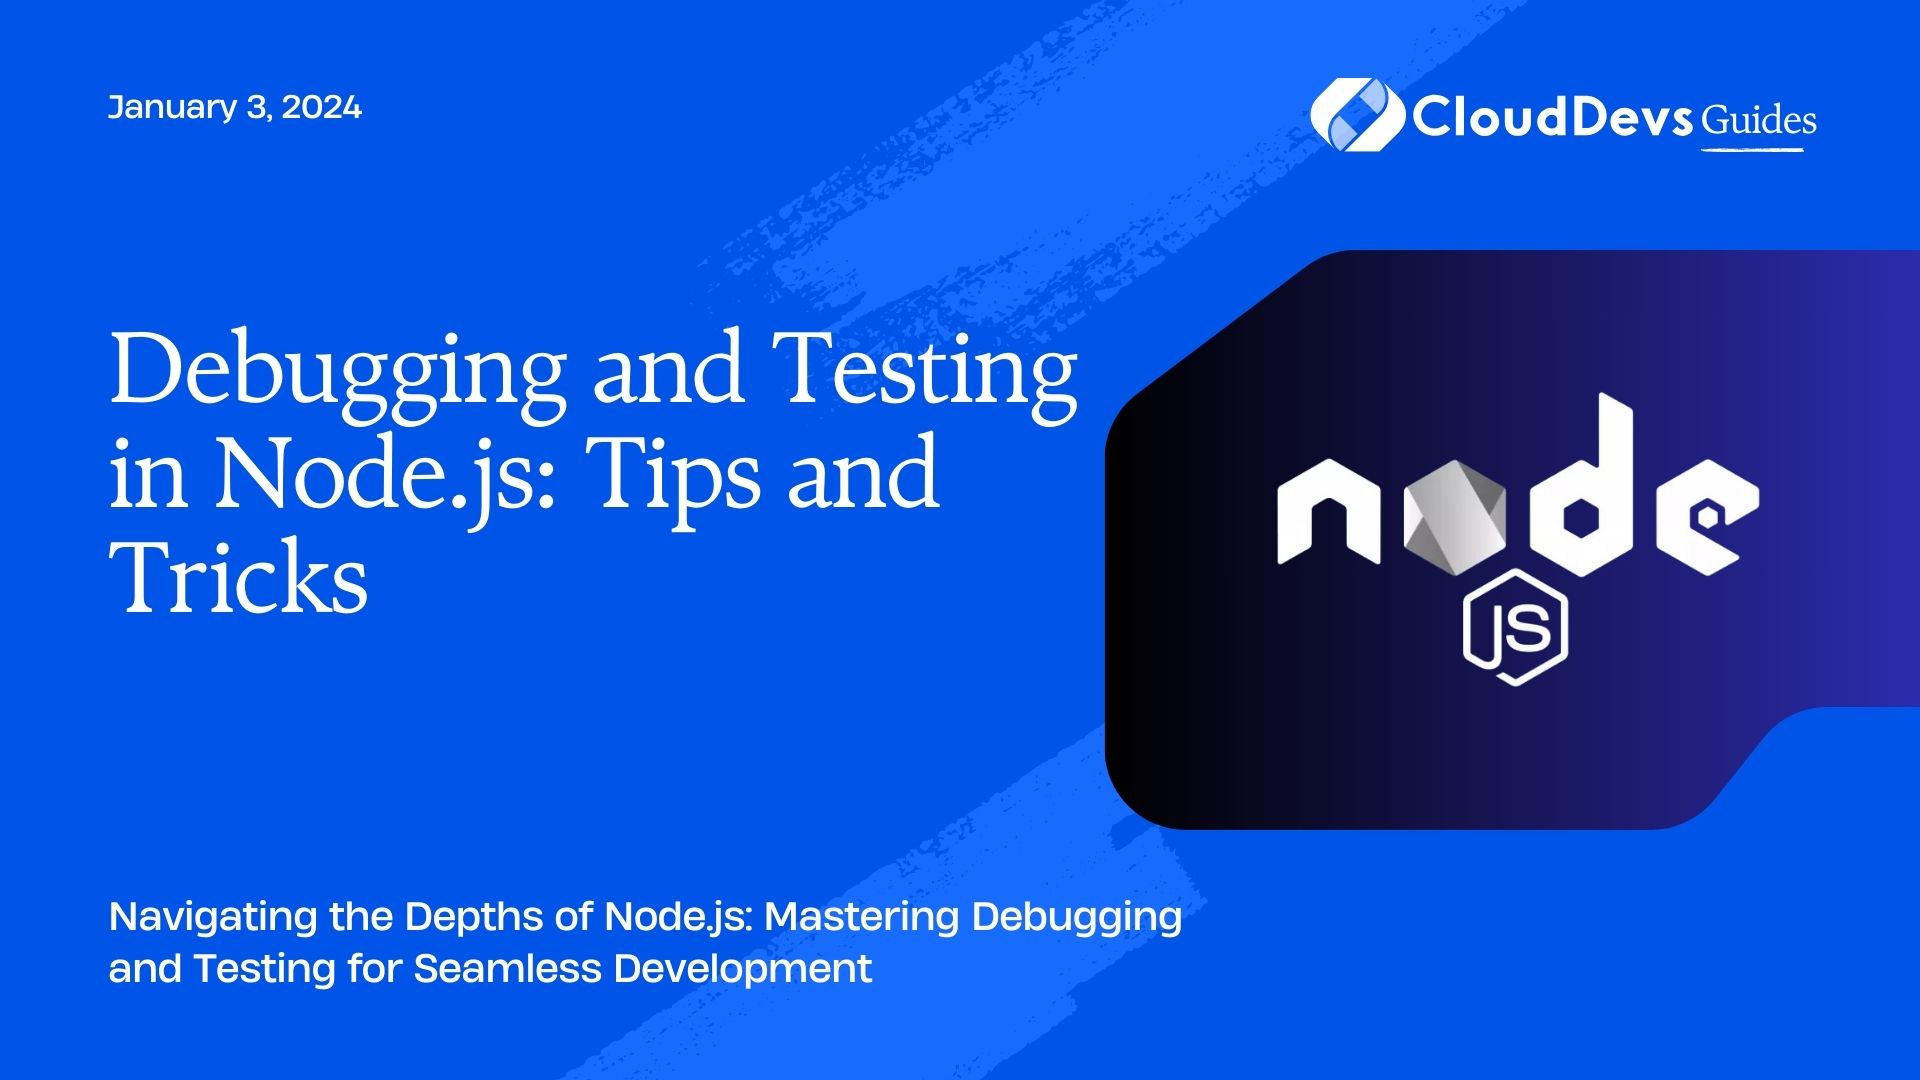 Debugging and Testing in Node.js: Tips and Tricks